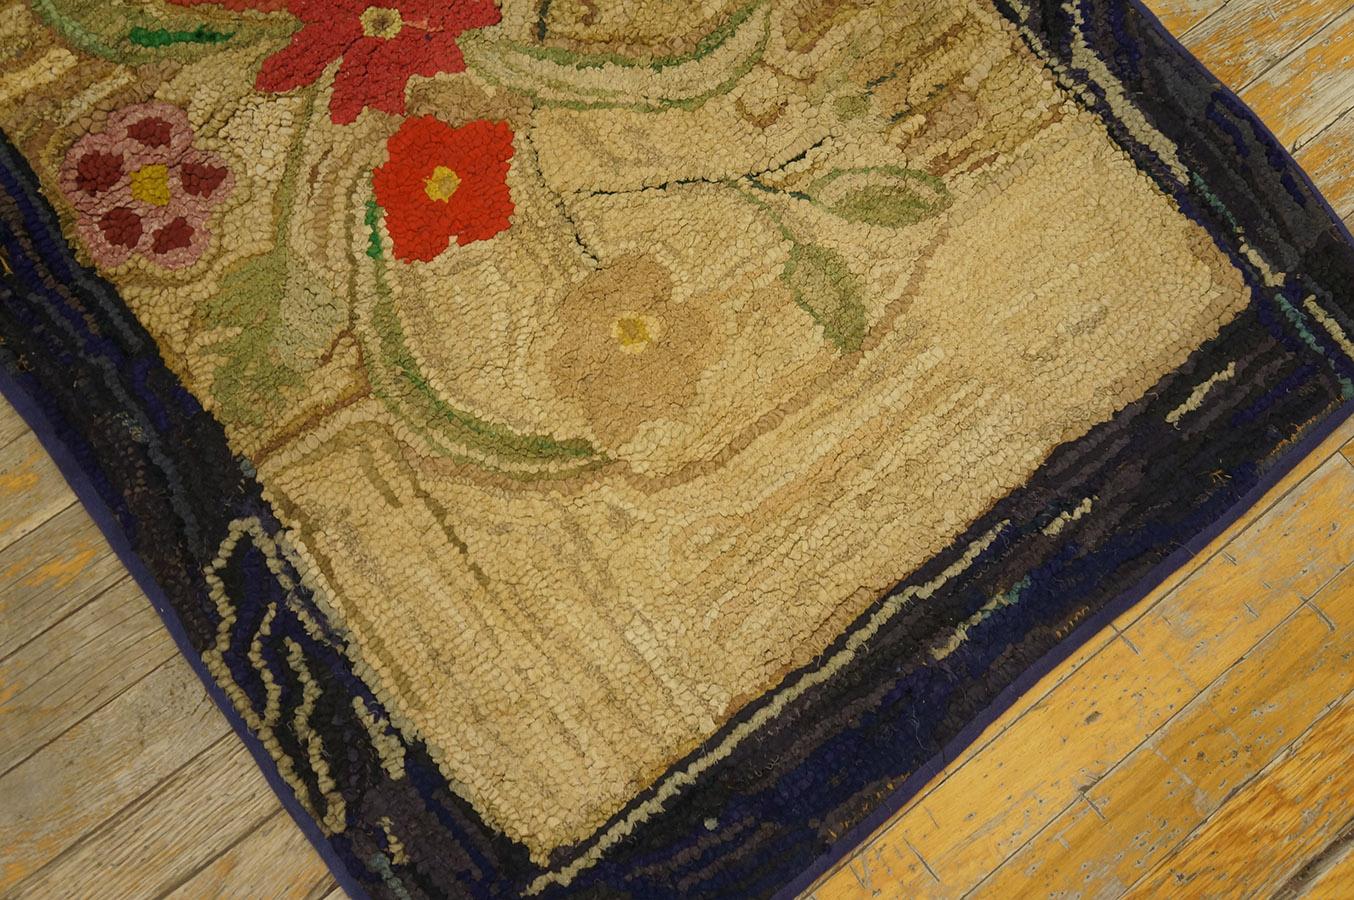 Late 19th Century Antique American Hooked Rug 2'3